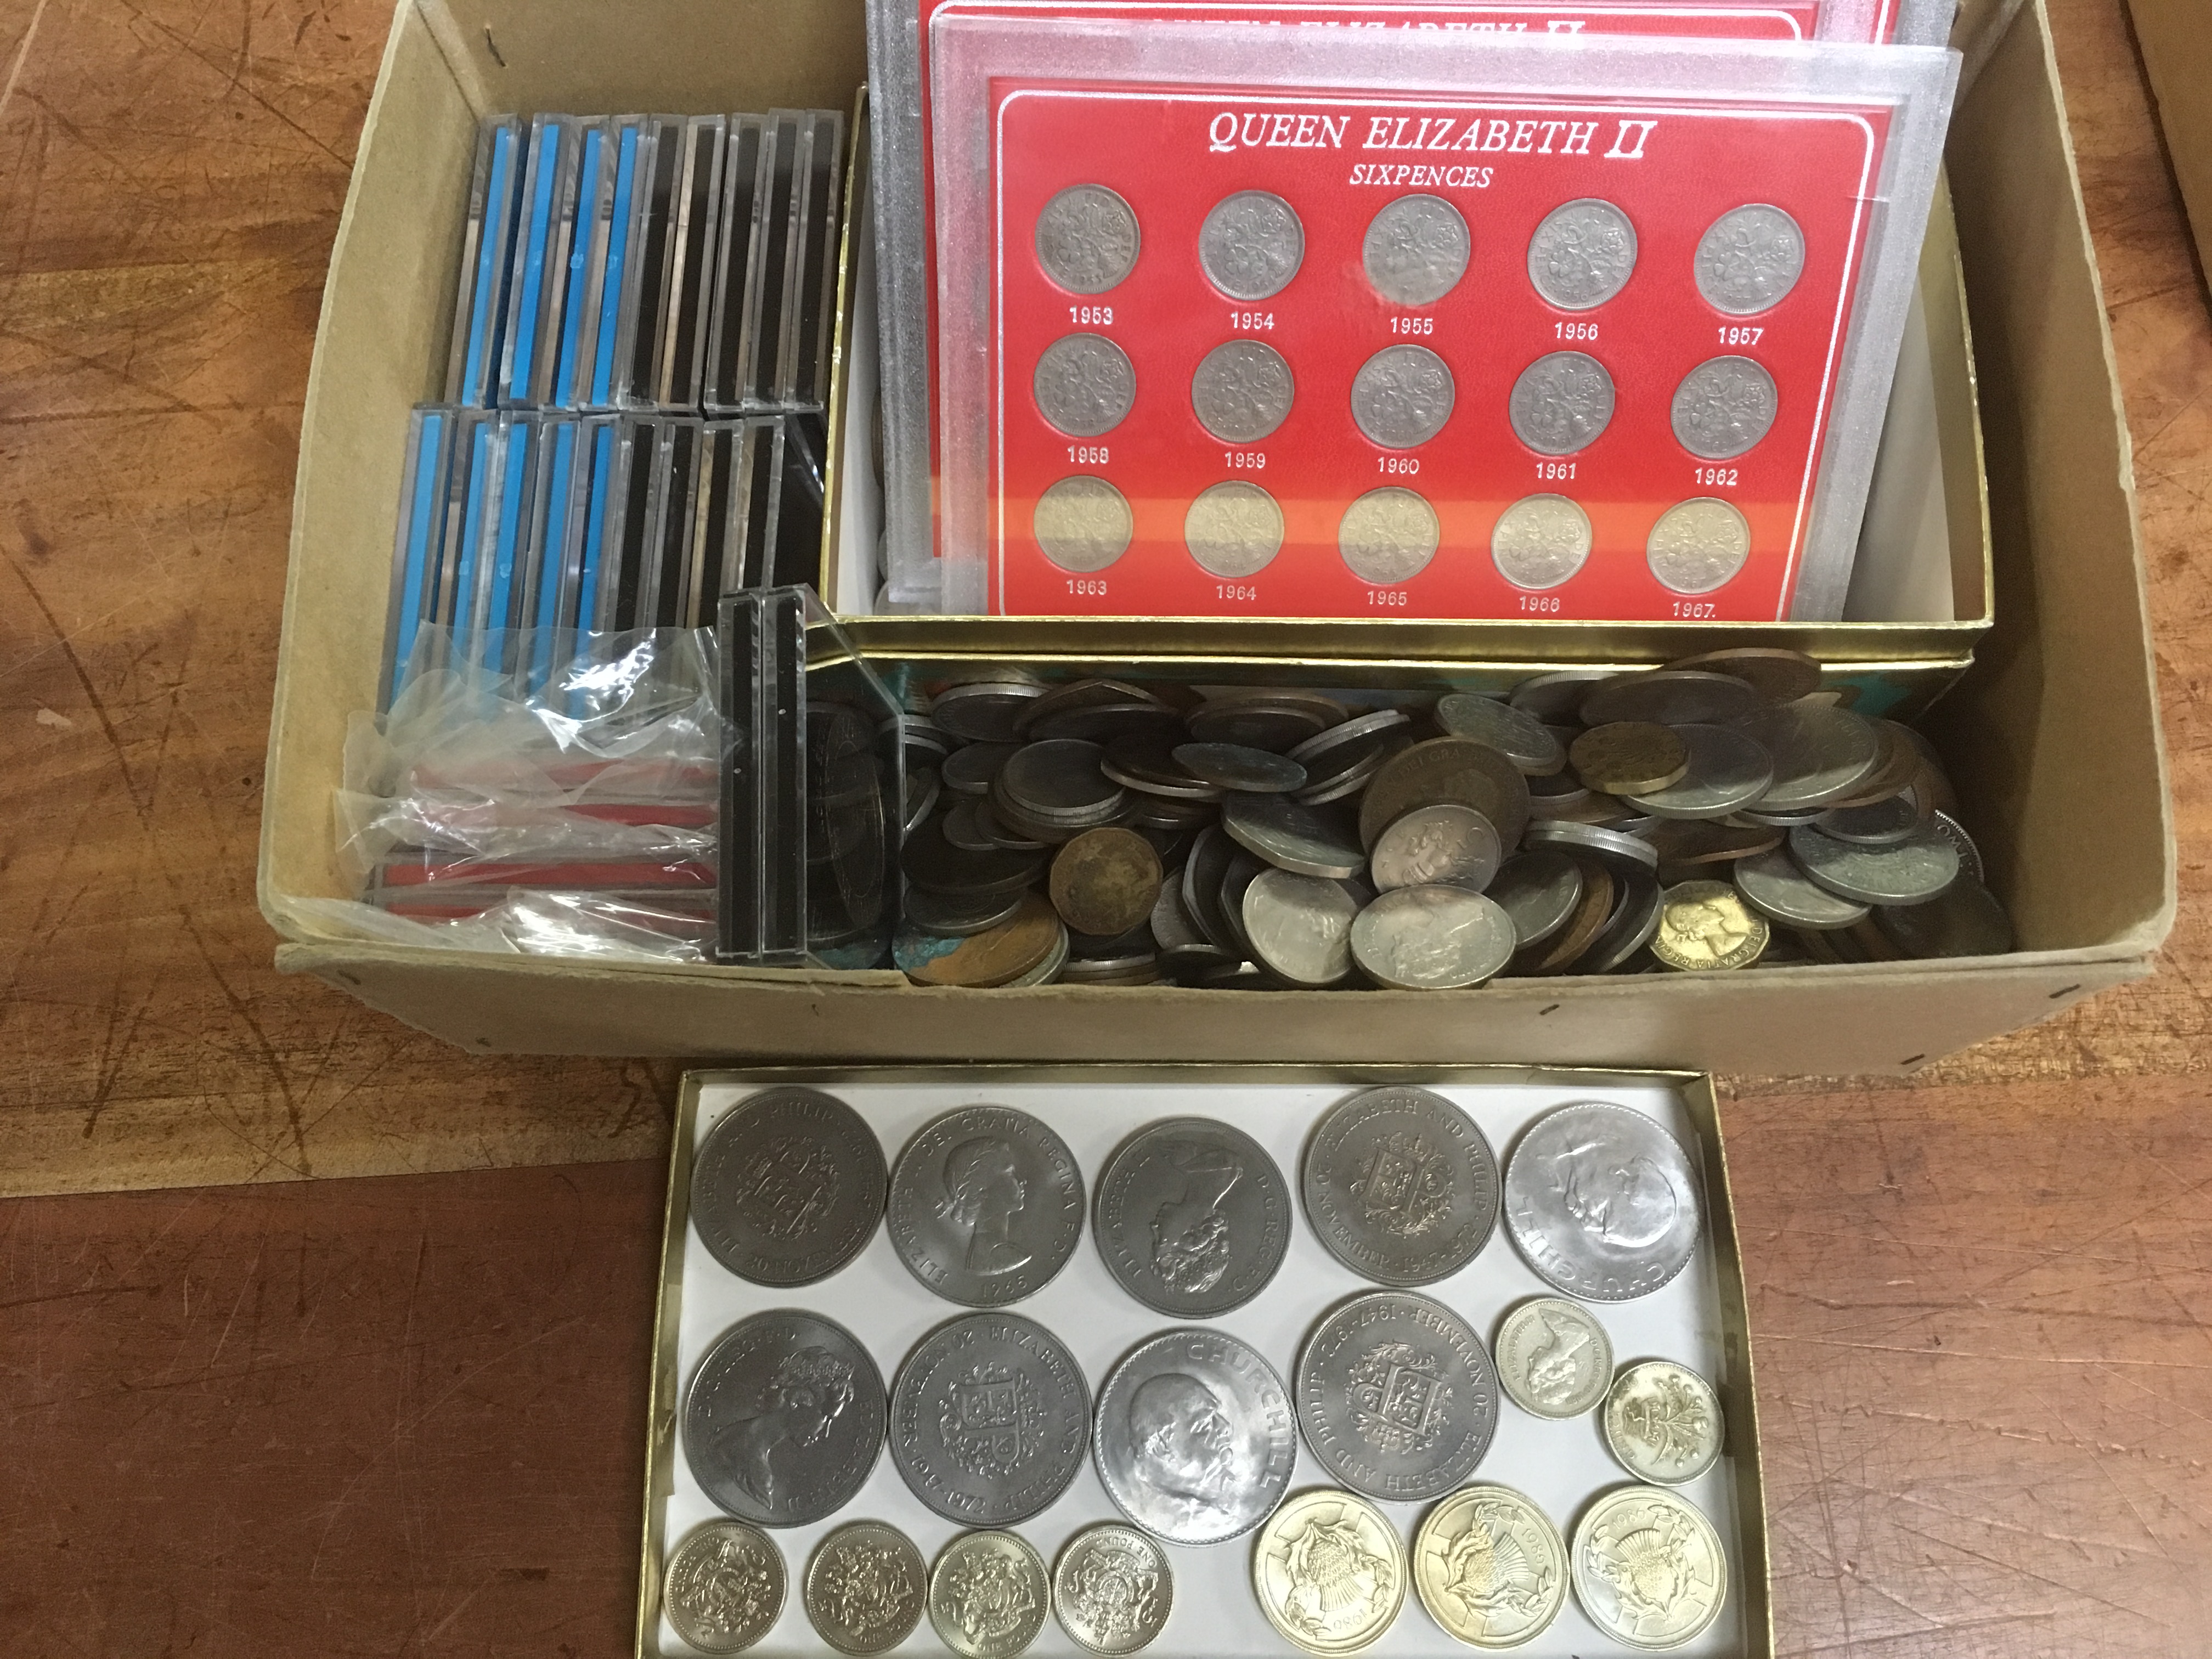 BOX OF GB AND OVERSEAS COINS, SETS OF SIXPENCES, CROWNS IN CASES, 1986 £2 (3) ETC.